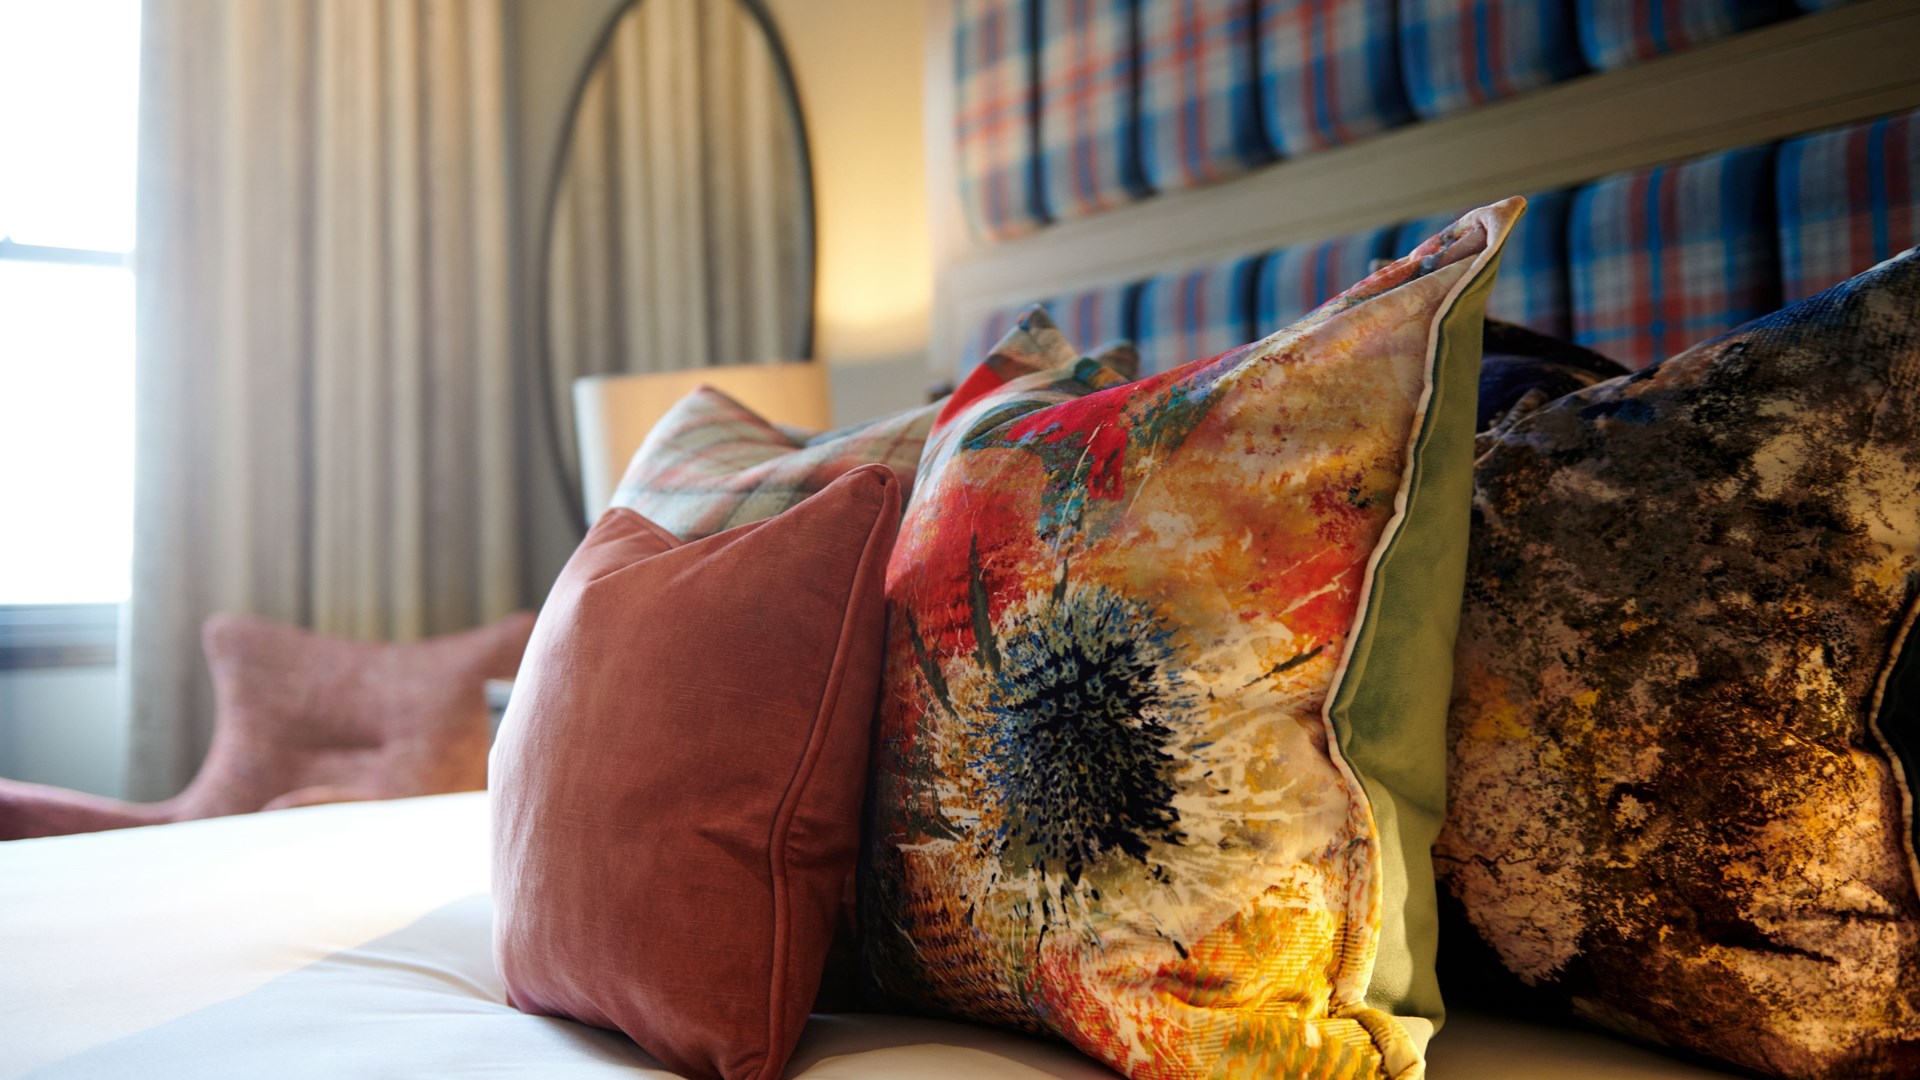 Colourful hotel room pillows with flowers.